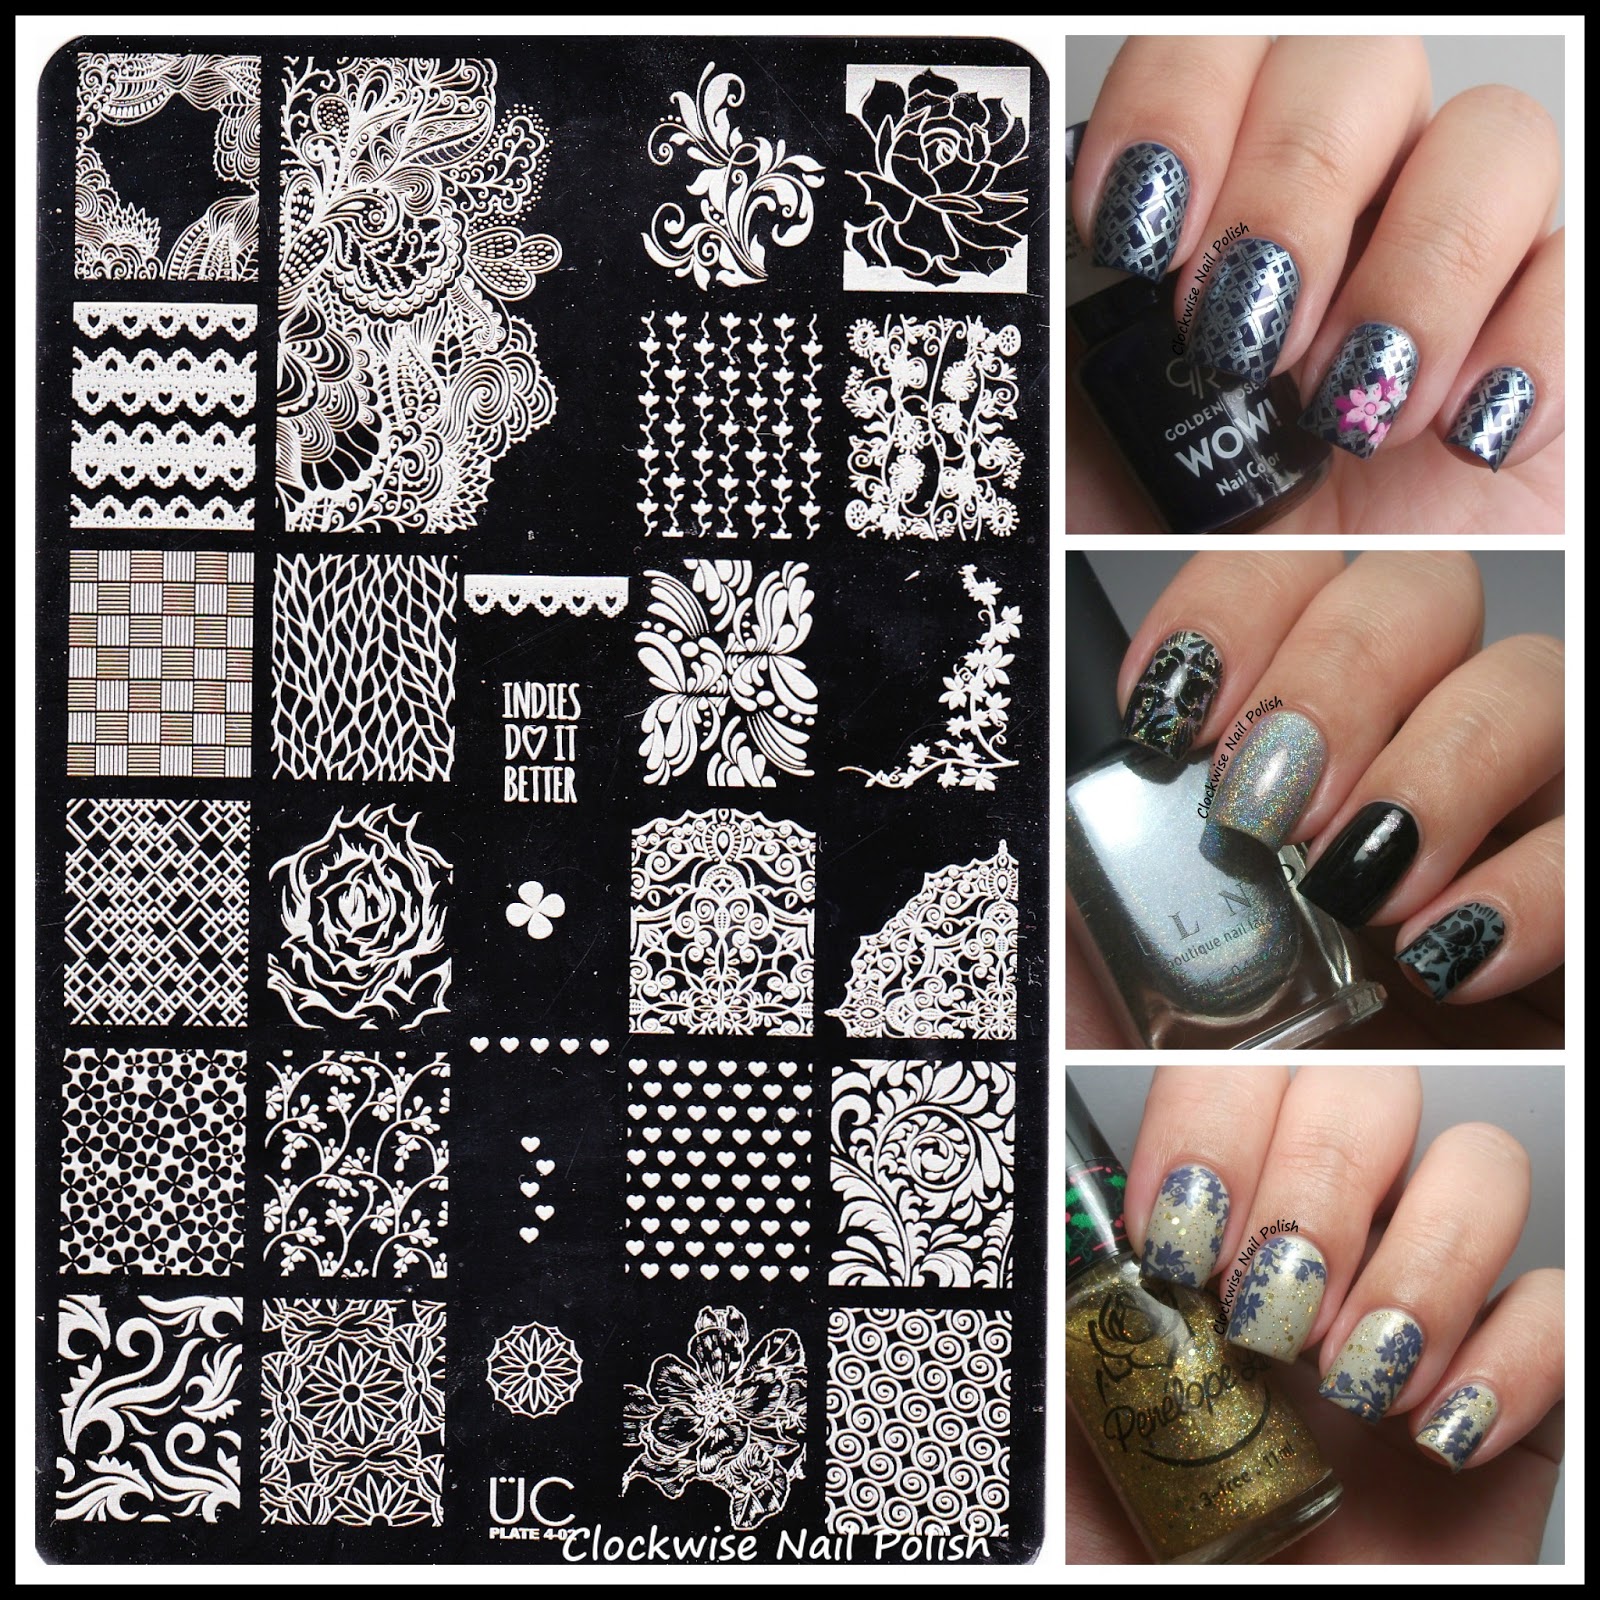 The Clockwise Nail Polish: Uber Chic UC 4-02 Stamping Plate Review